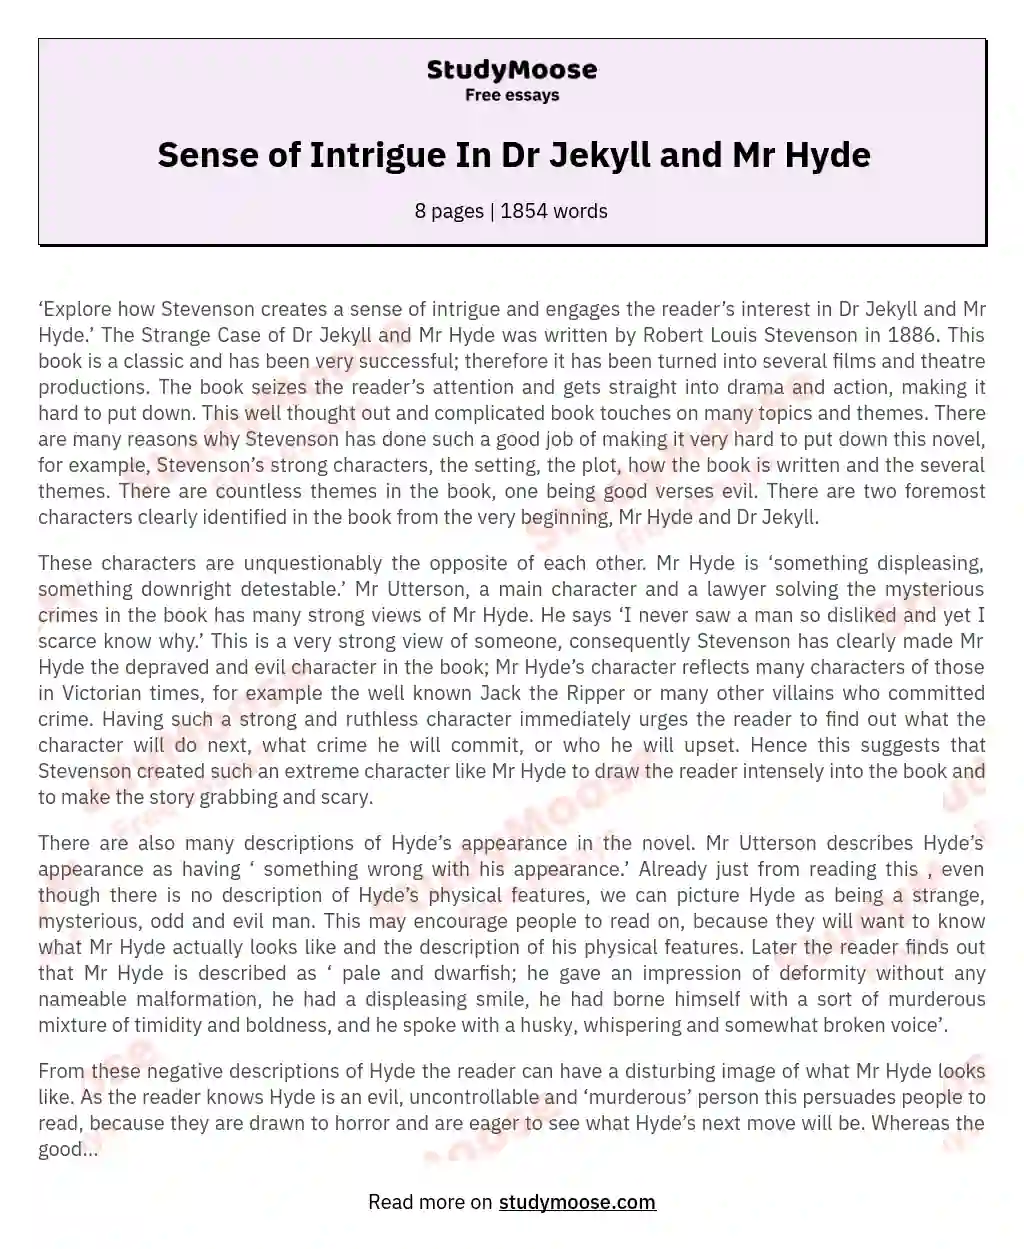 Sense of Intrigue In Dr Jekyll and Mr Hyde